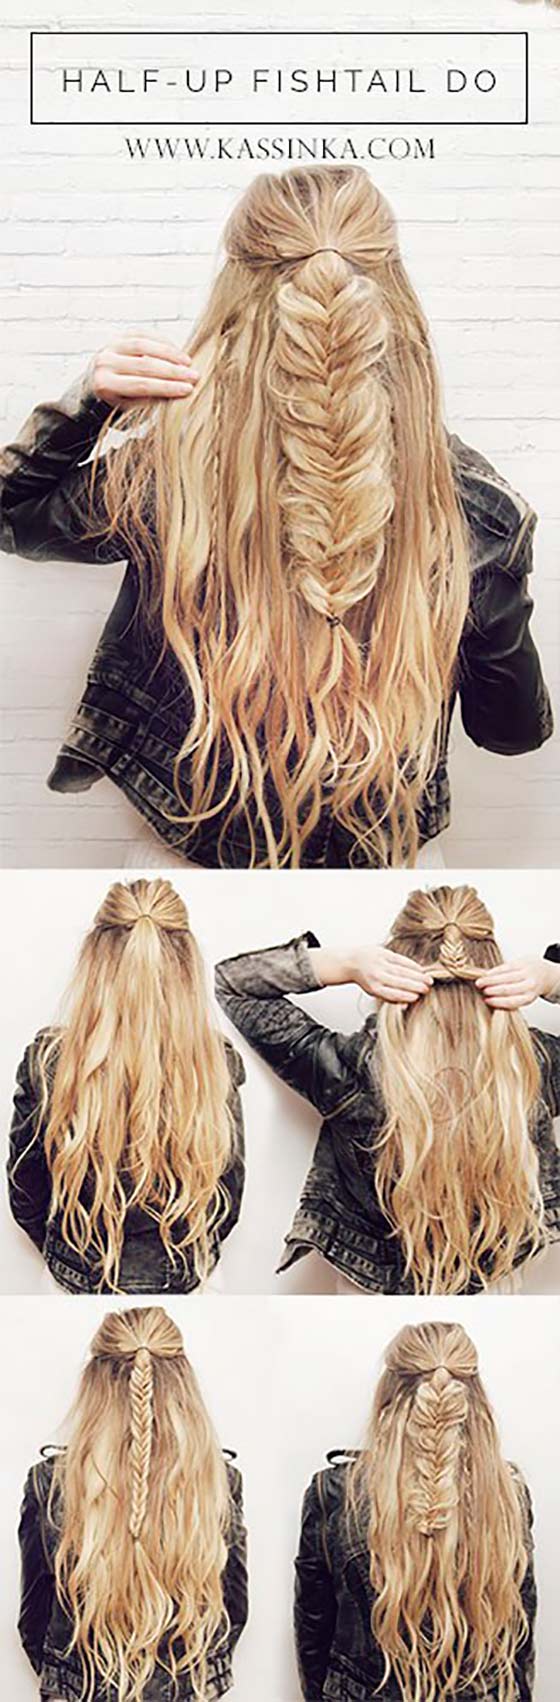 Half-up fishtail braid hairstyle for long hair